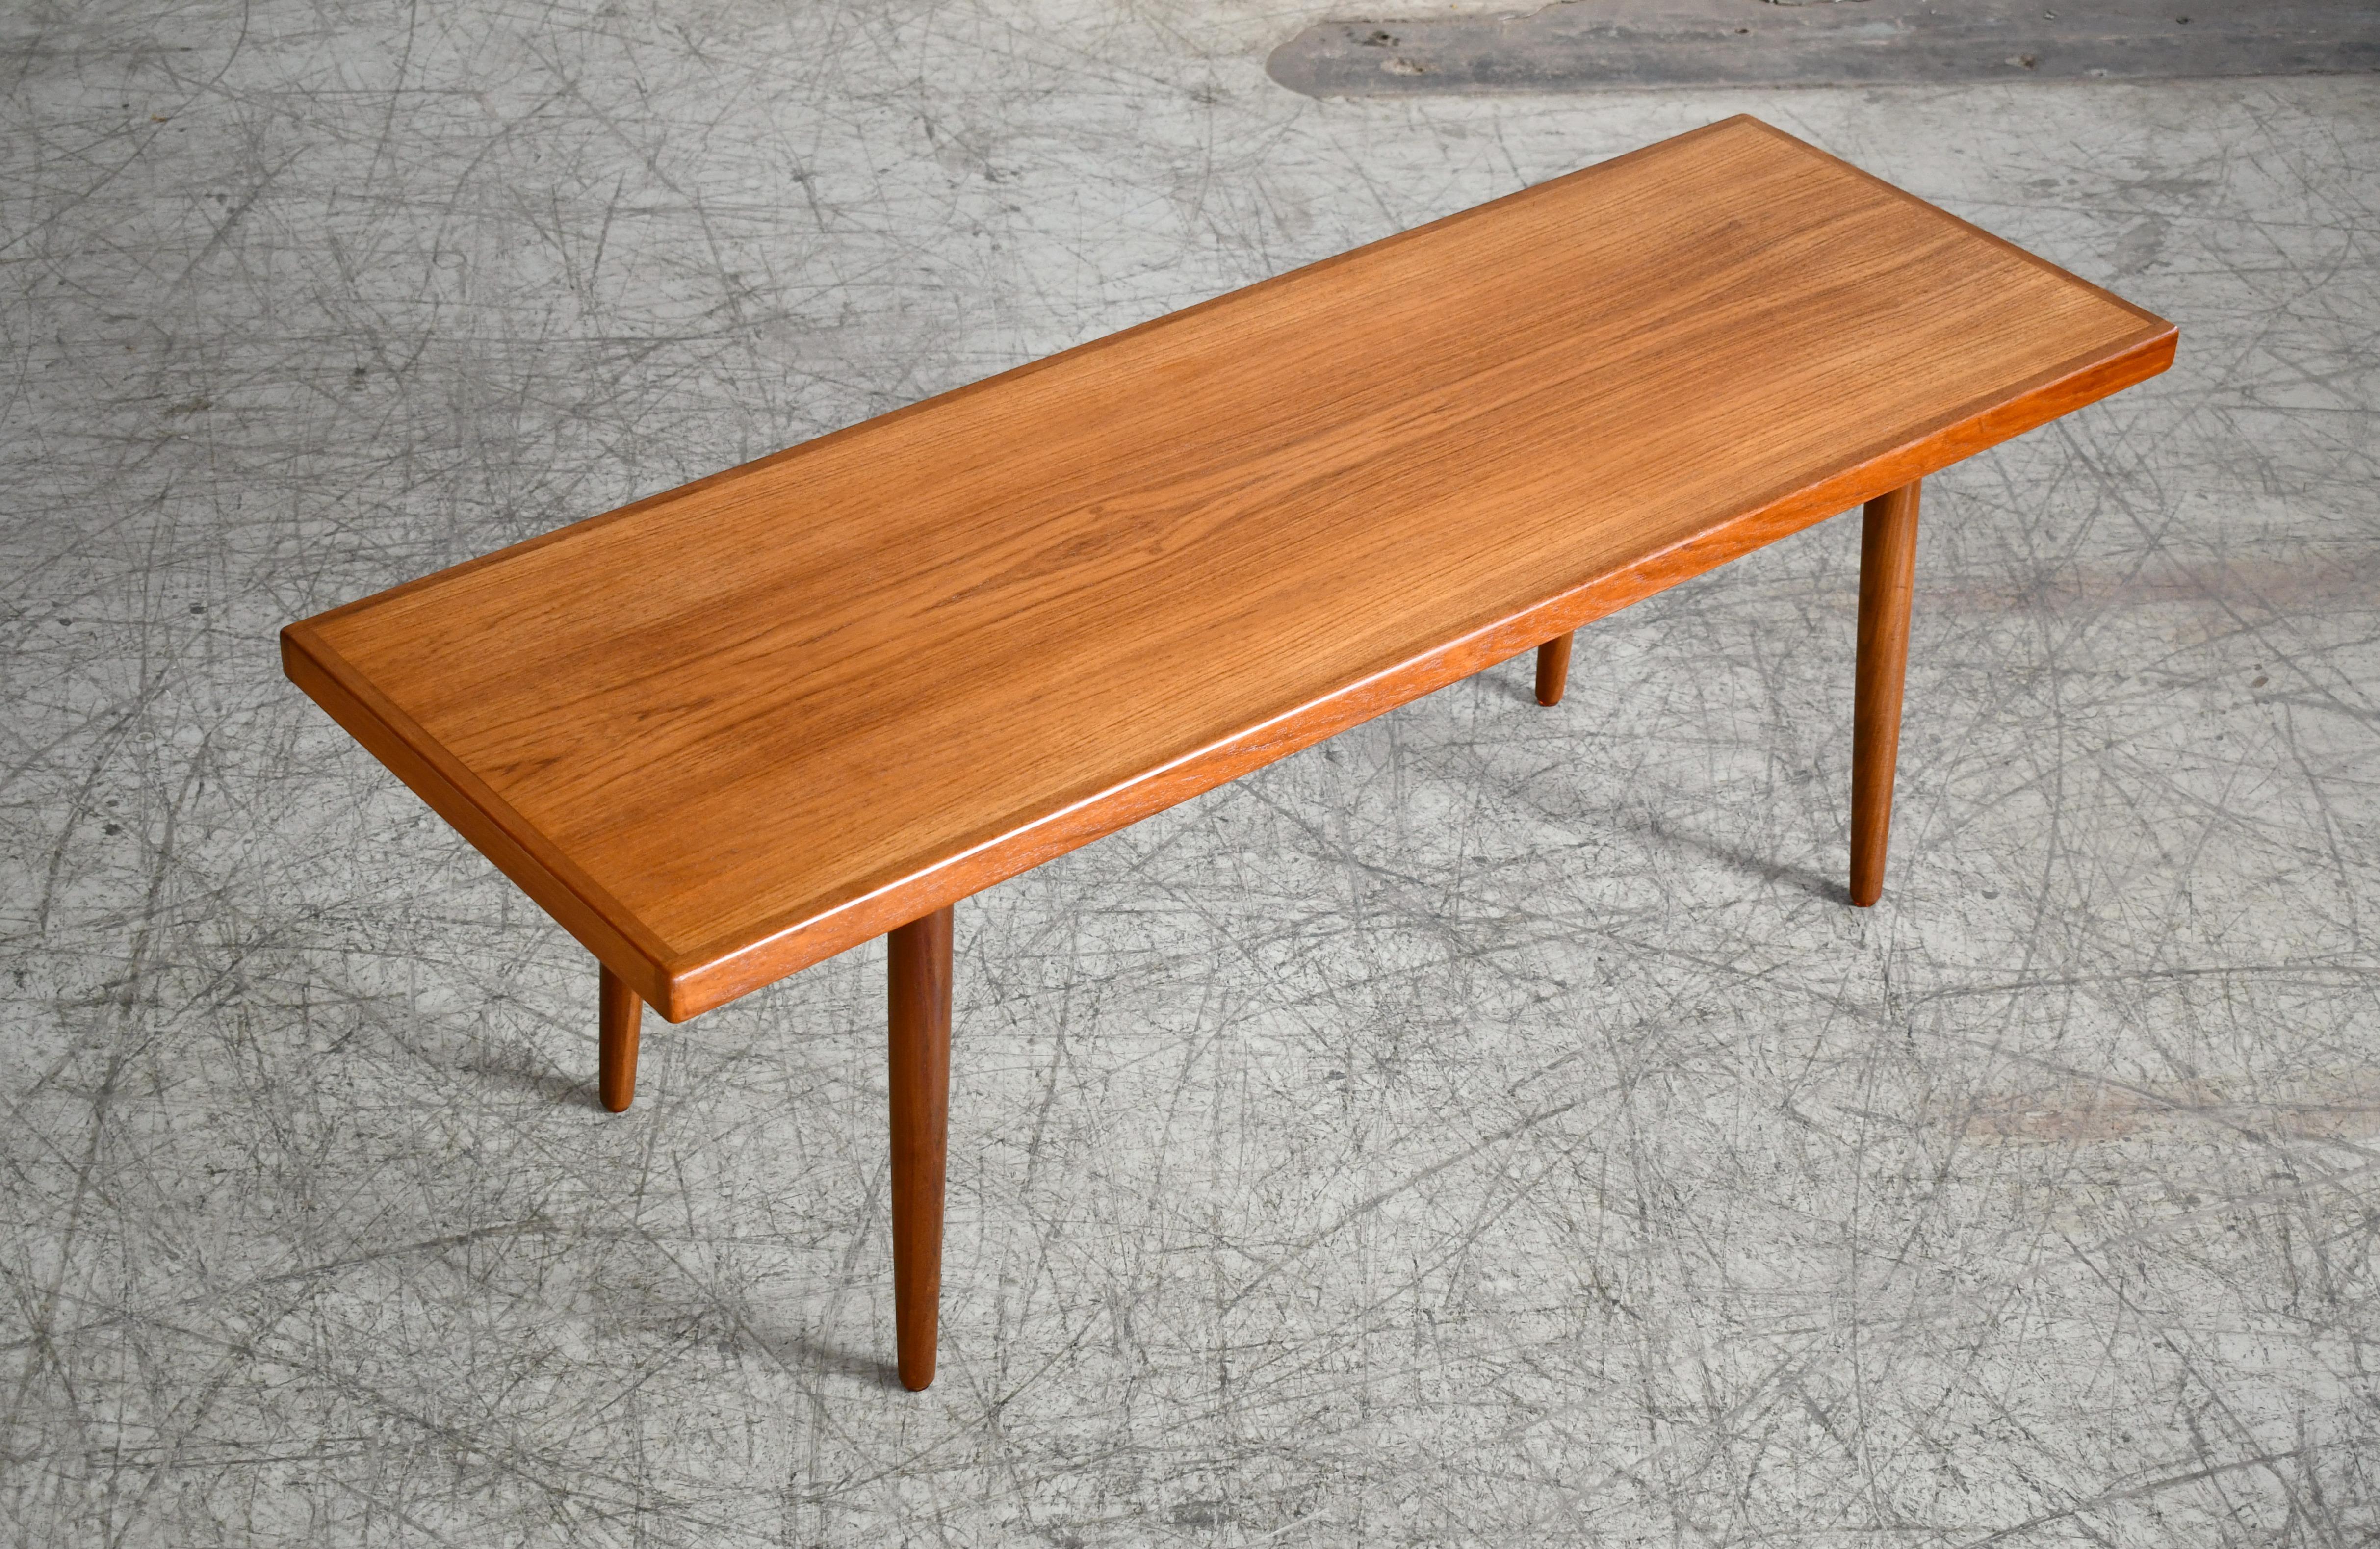 Beautiful classic Danish teak coffee table with very clean simple lines yet very refined and stylish. Very reminiscent of some of the tables designed by Peter Hvidt for France and Daverkosen. 
Crafted in teak veneer with elaborate use of solid